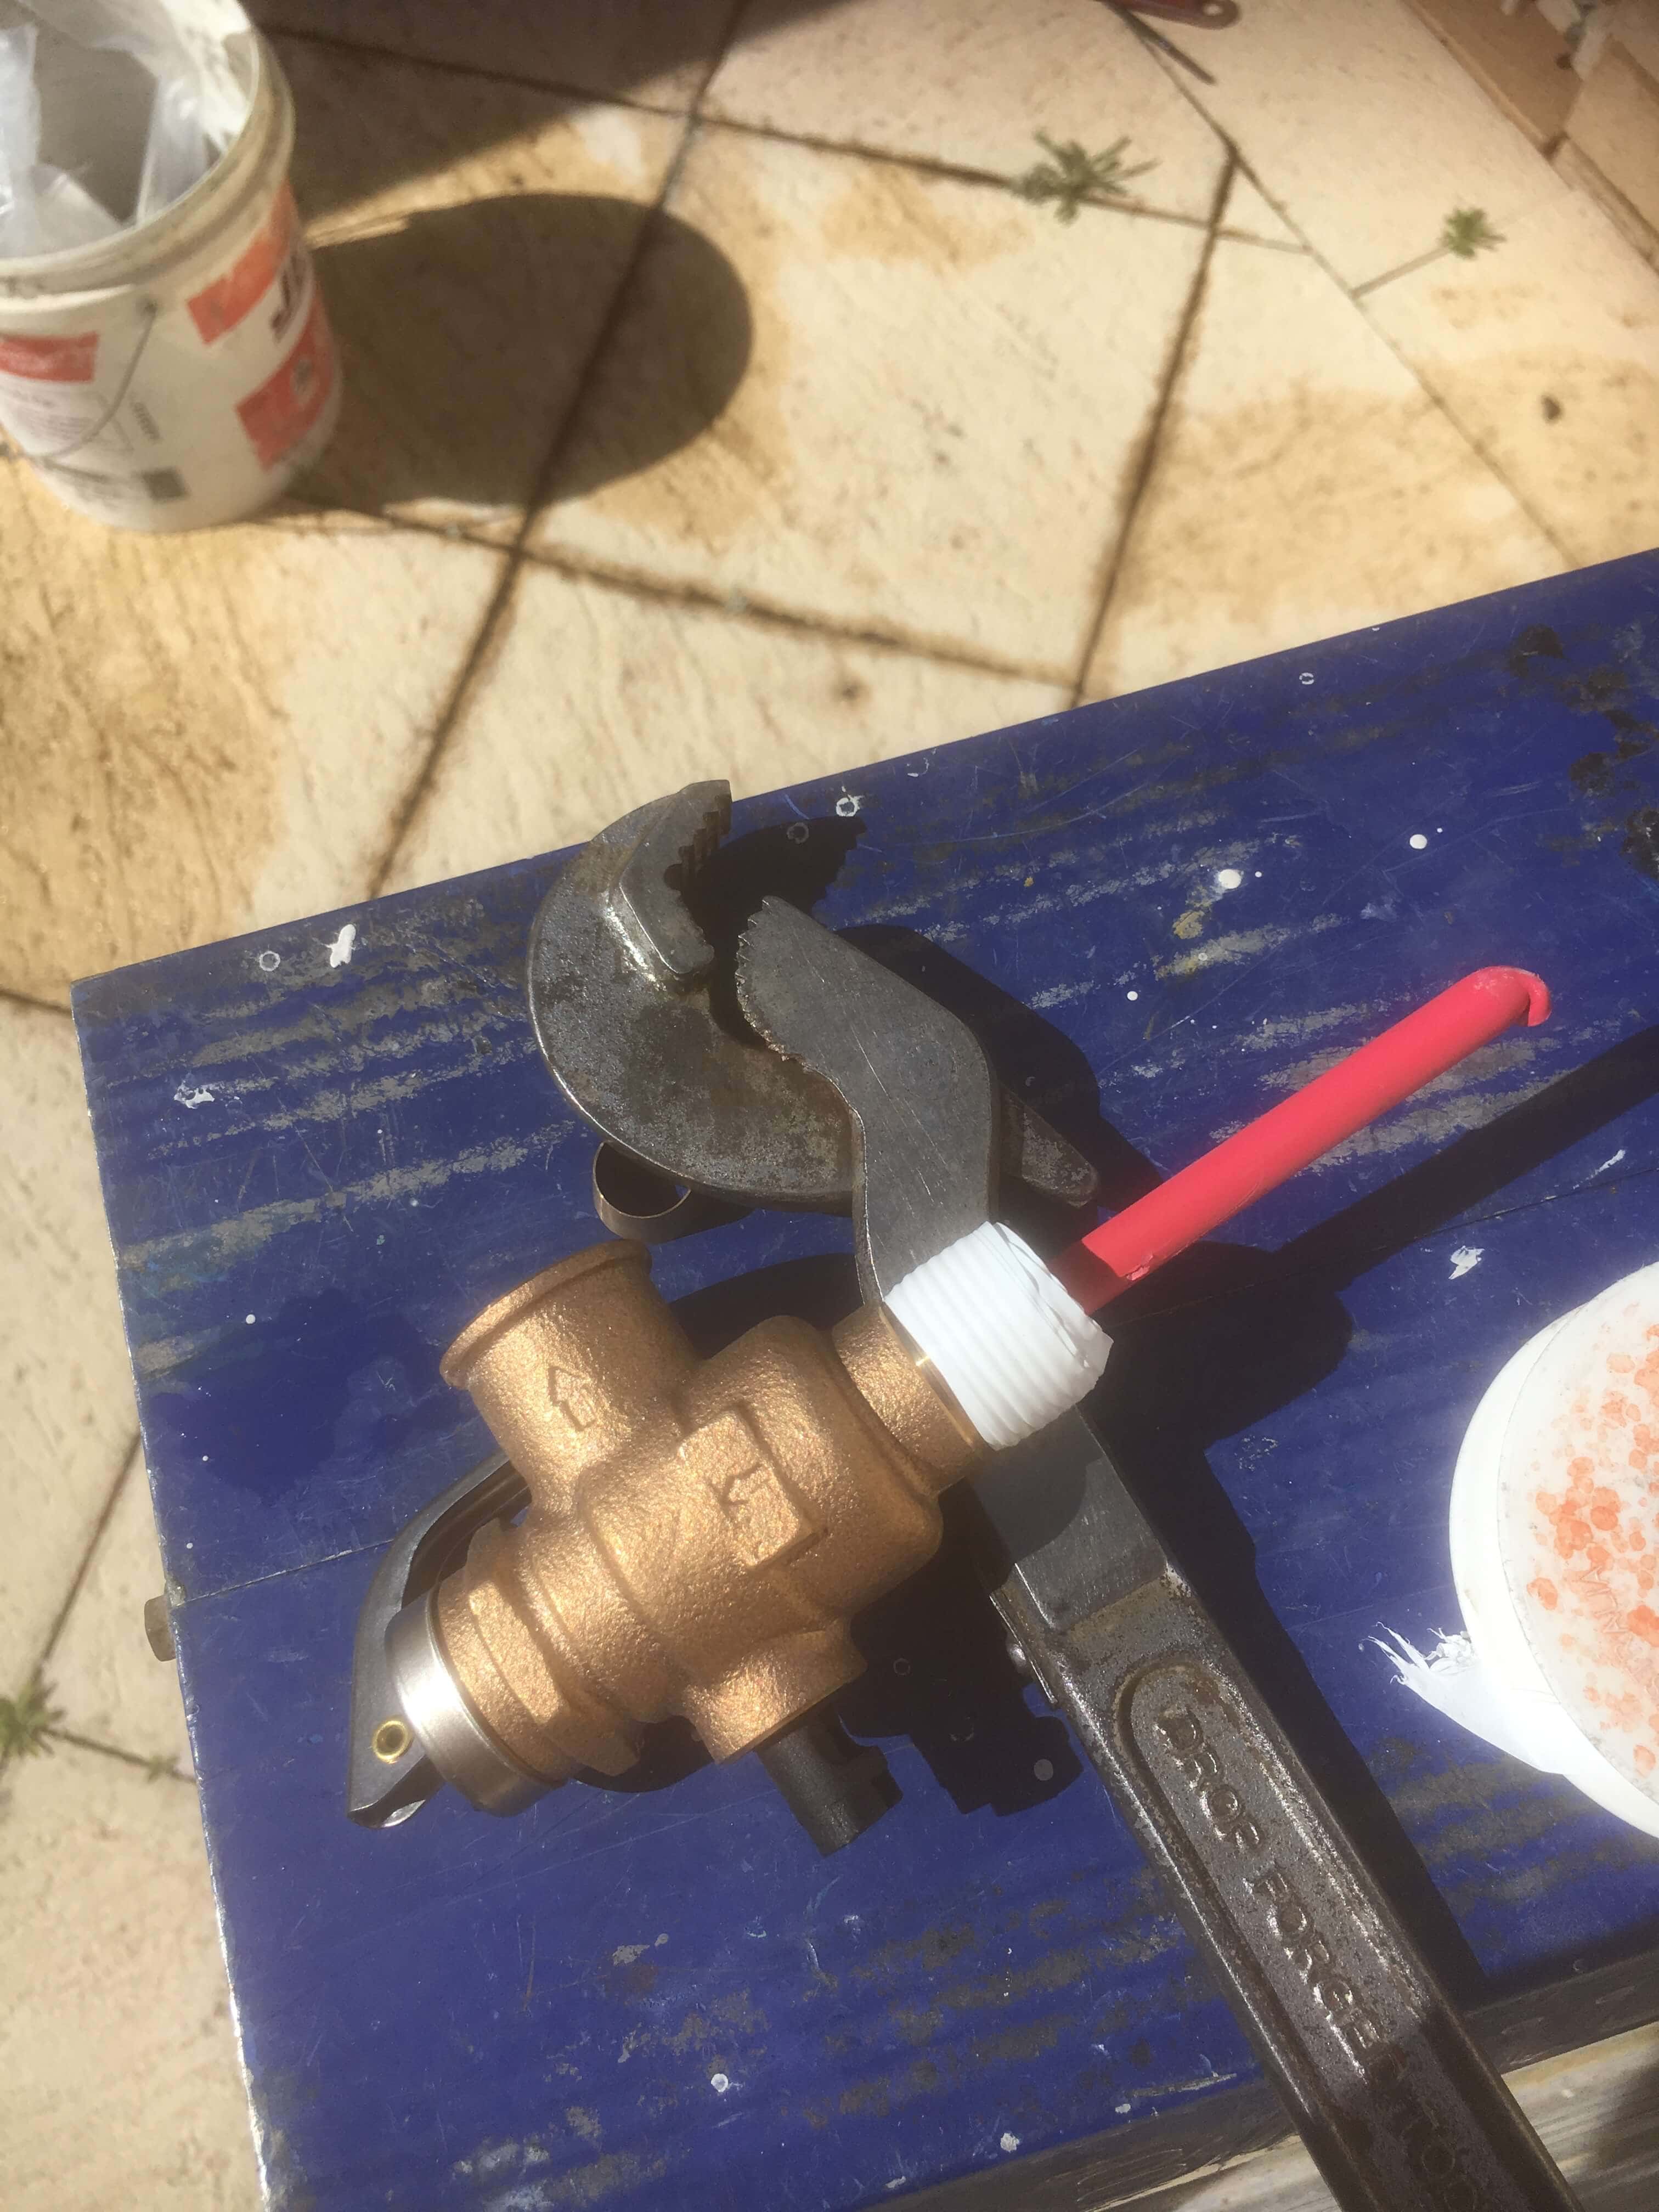 Everyday Plumbers Residential Hotwater Services - Relief Valve Taken Out